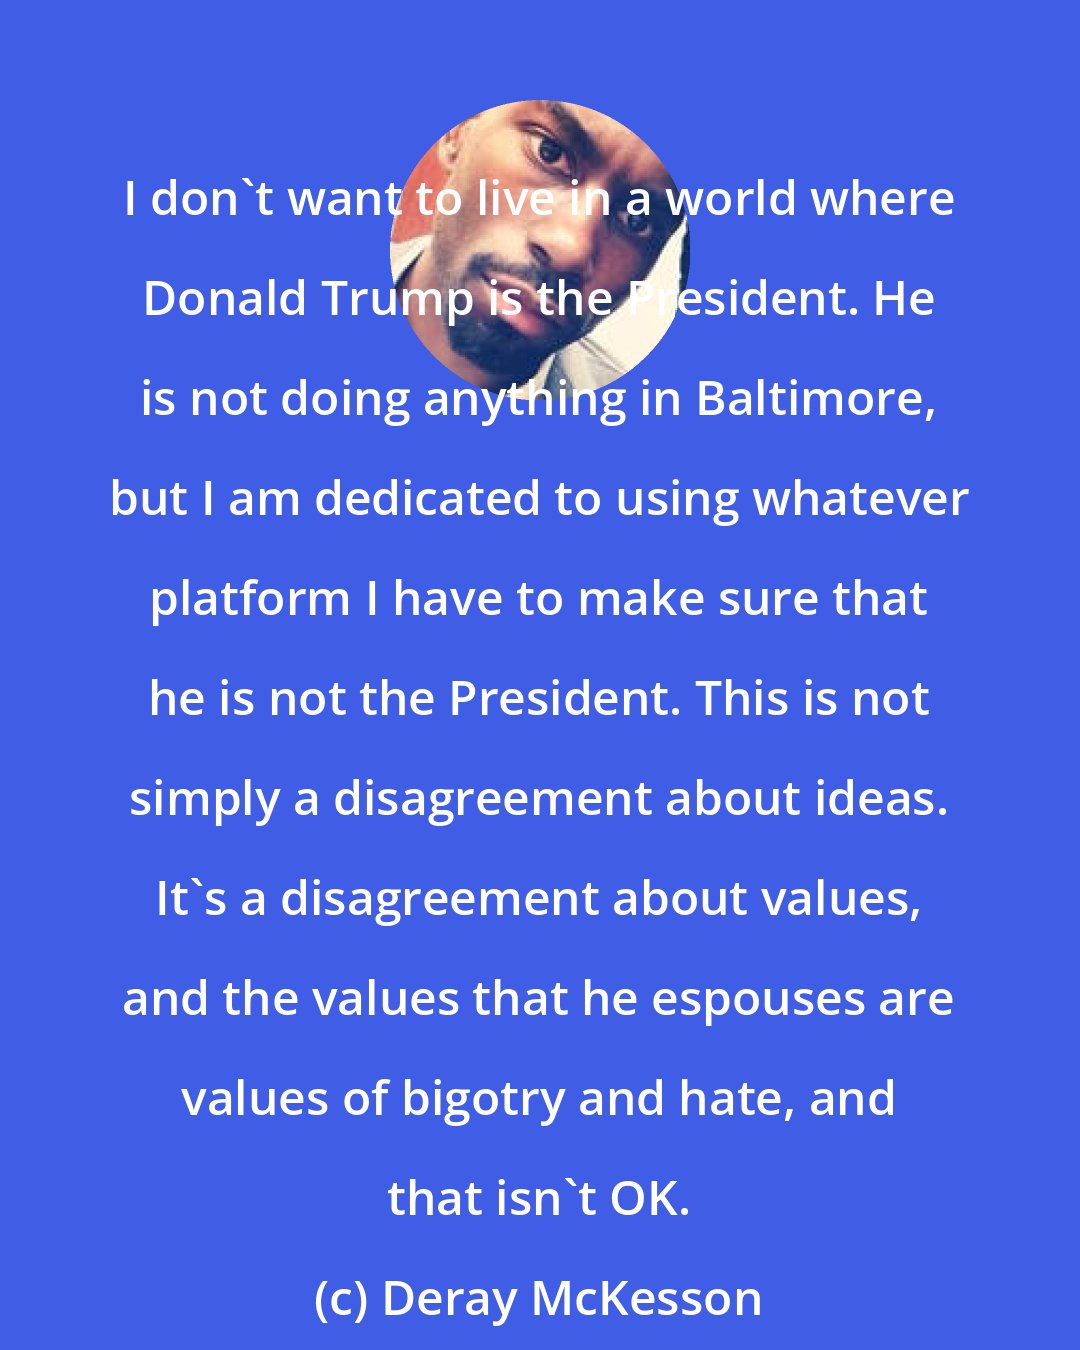 Deray McKesson: I don't want to live in a world where Donald Trump is the President. He is not doing anything in Baltimore, but I am dedicated to using whatever platform I have to make sure that he is not the President. This is not simply a disagreement about ideas. It's a disagreement about values, and the values that he espouses are values of bigotry and hate, and that isn't OK.